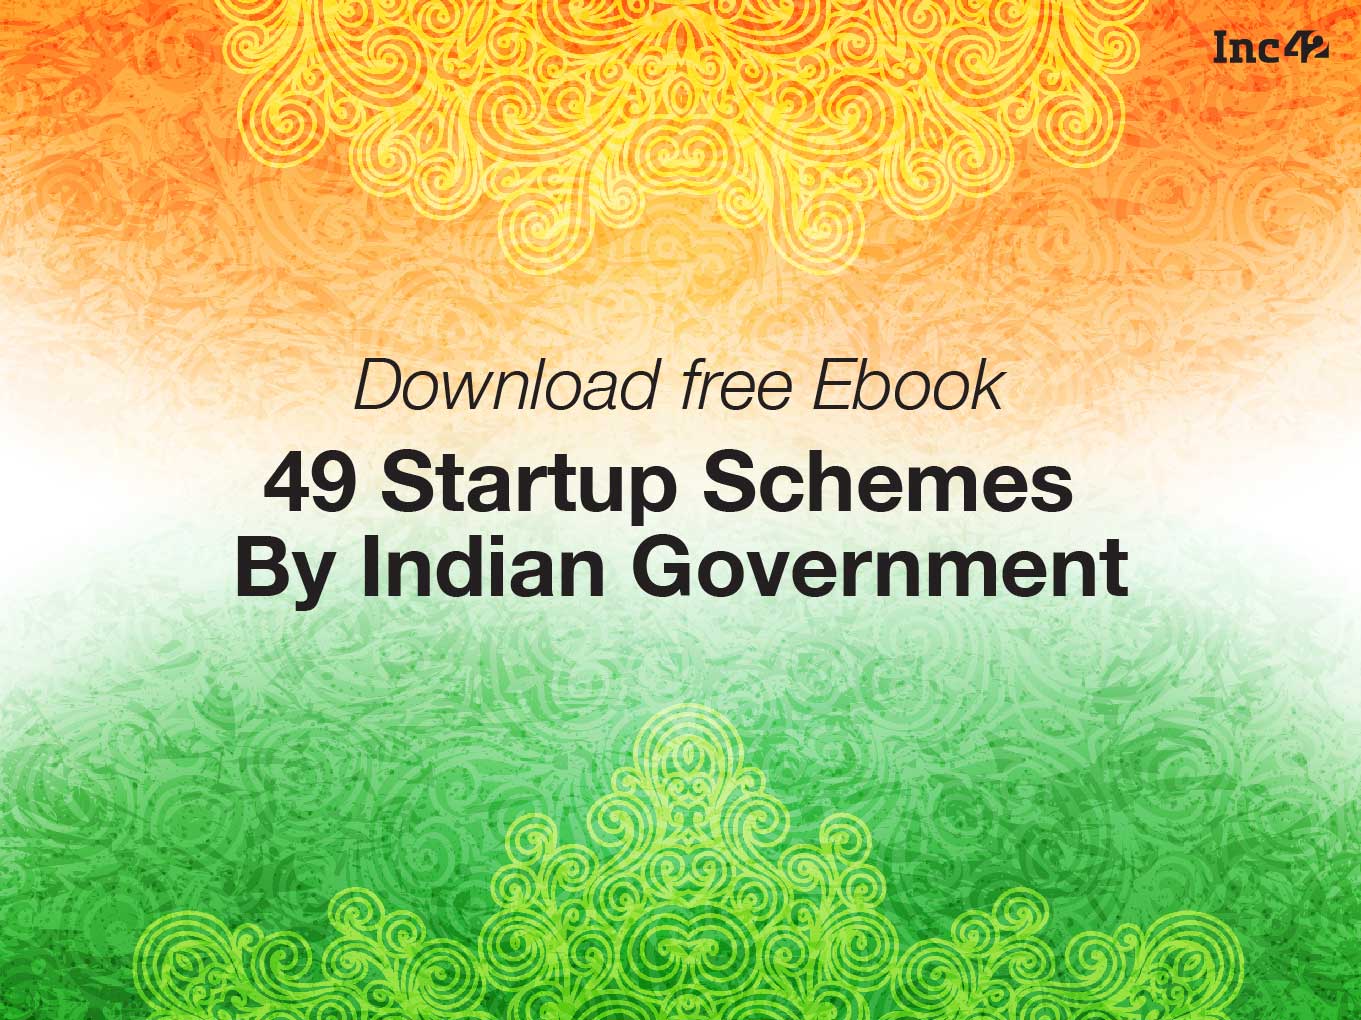 49 Startup Schemes By Indian Government